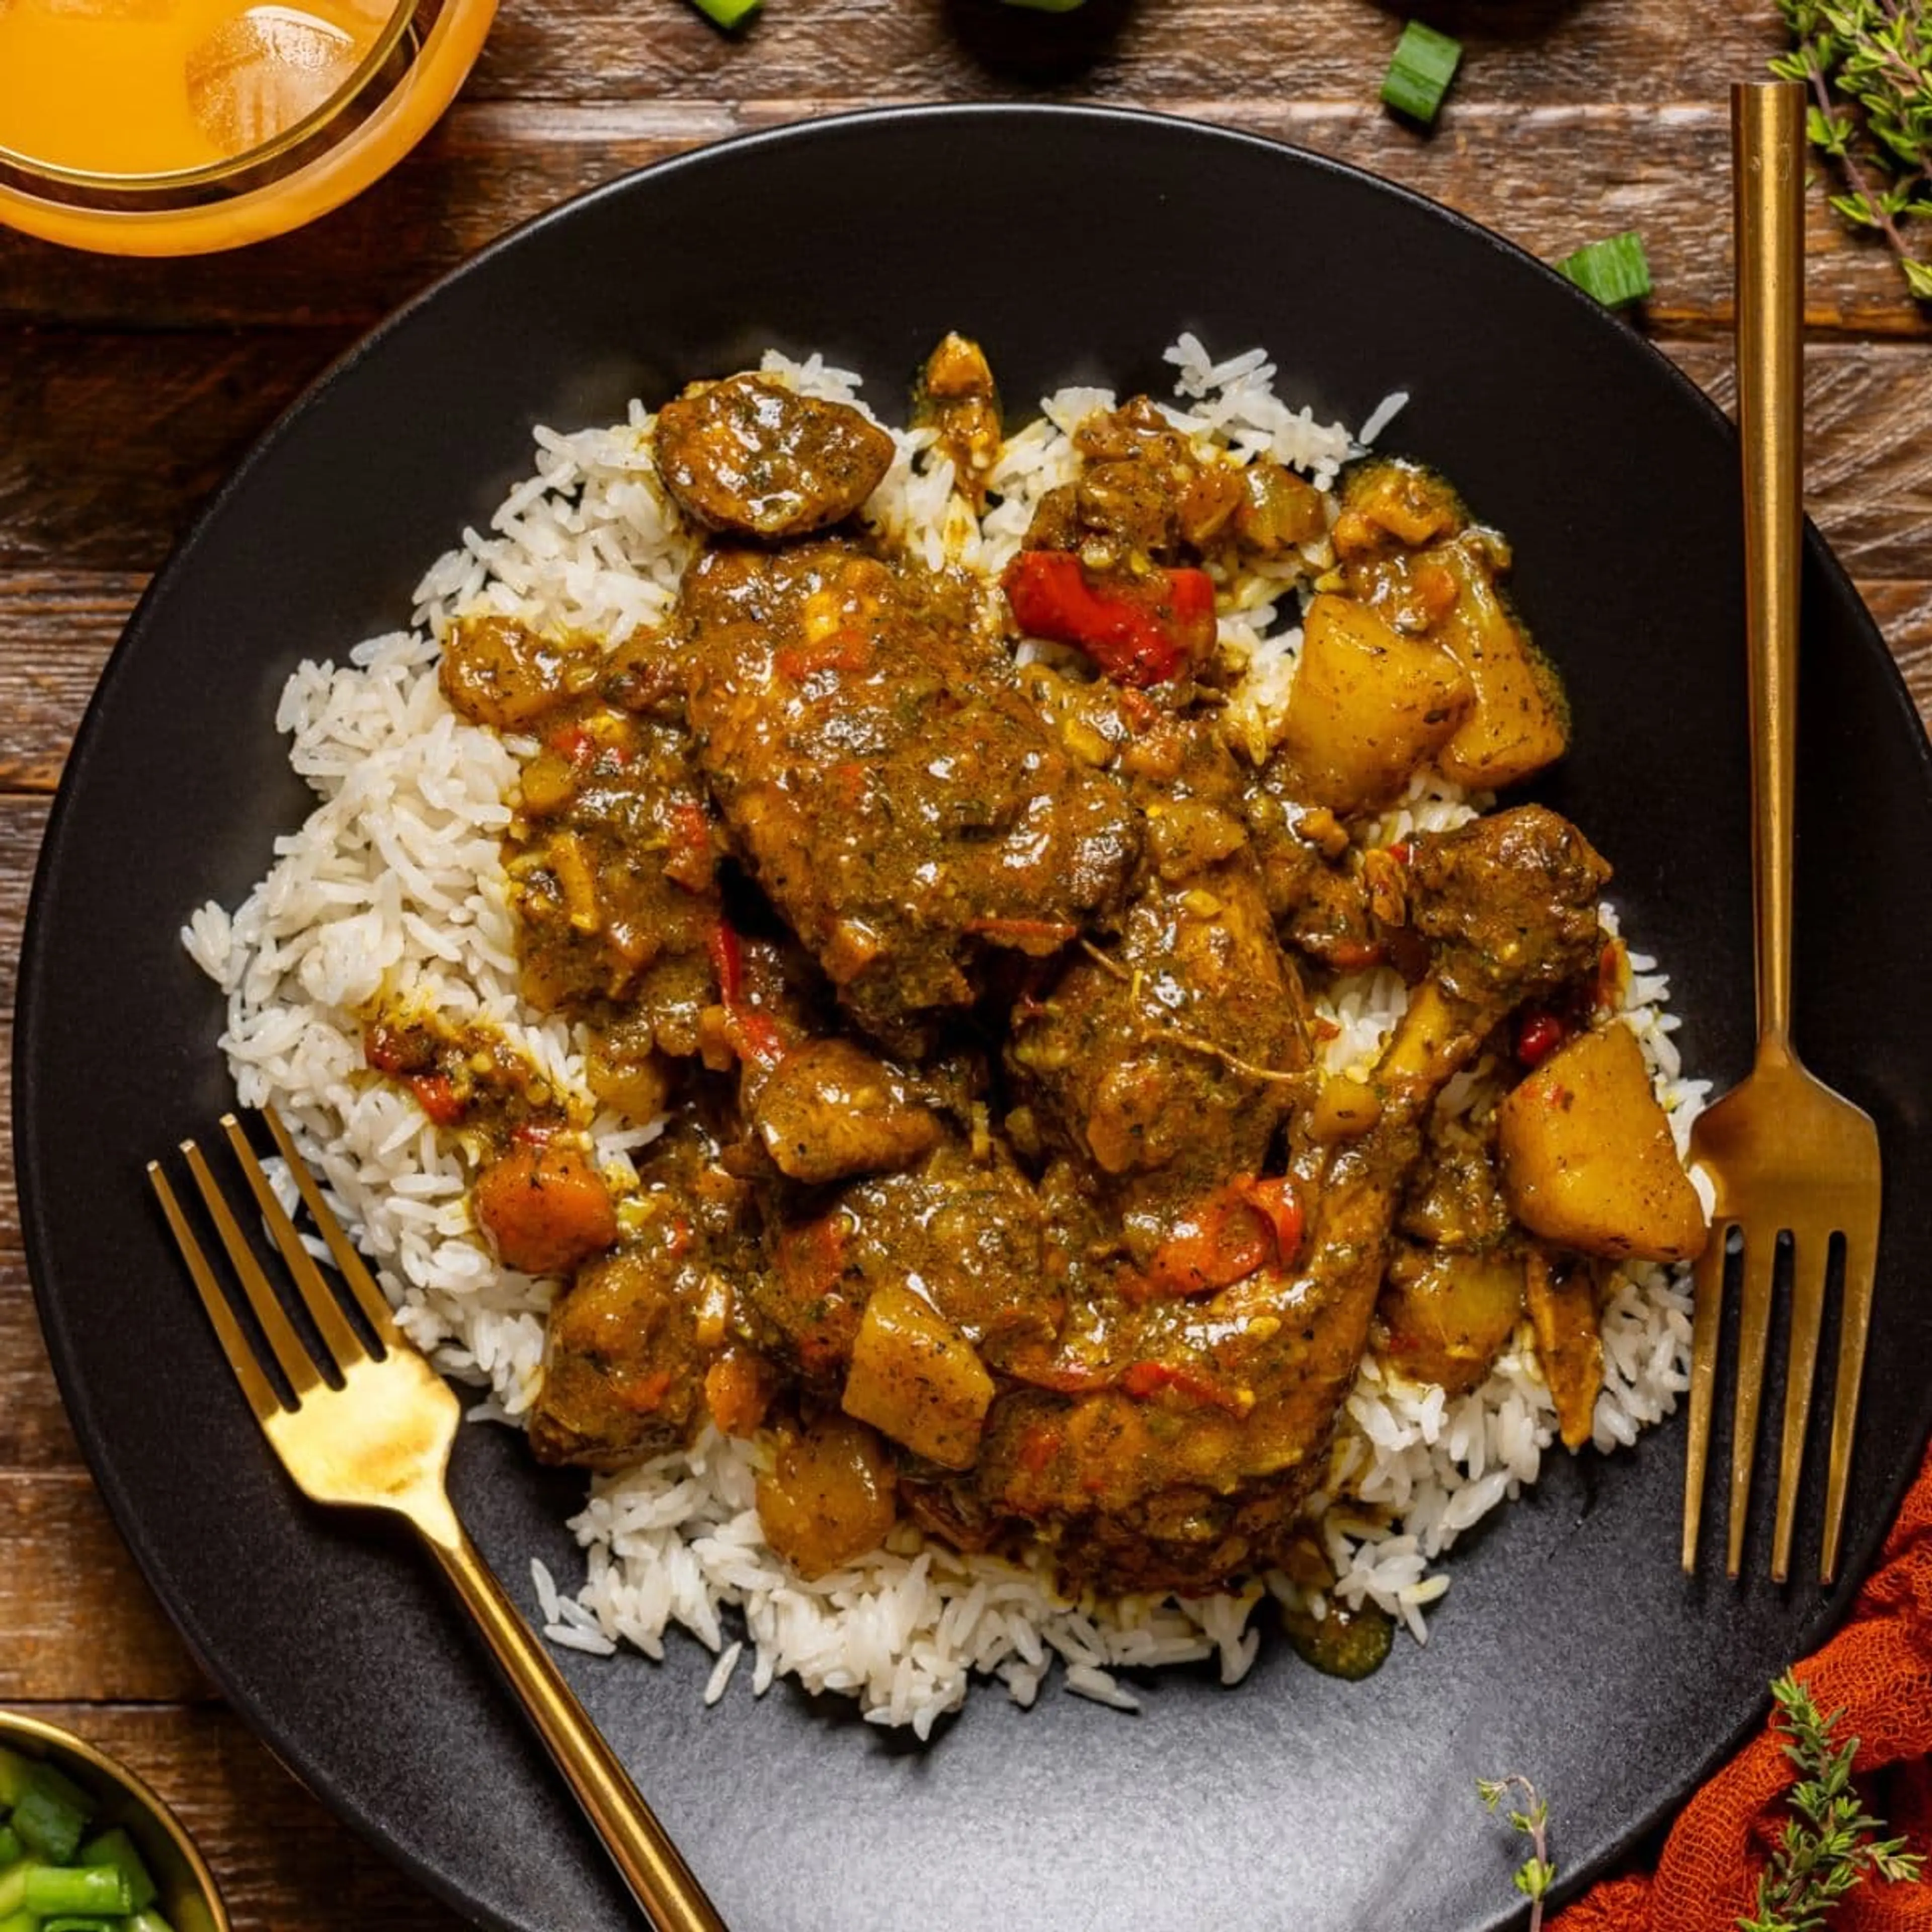 Authentic Jamaican Curry Chicken